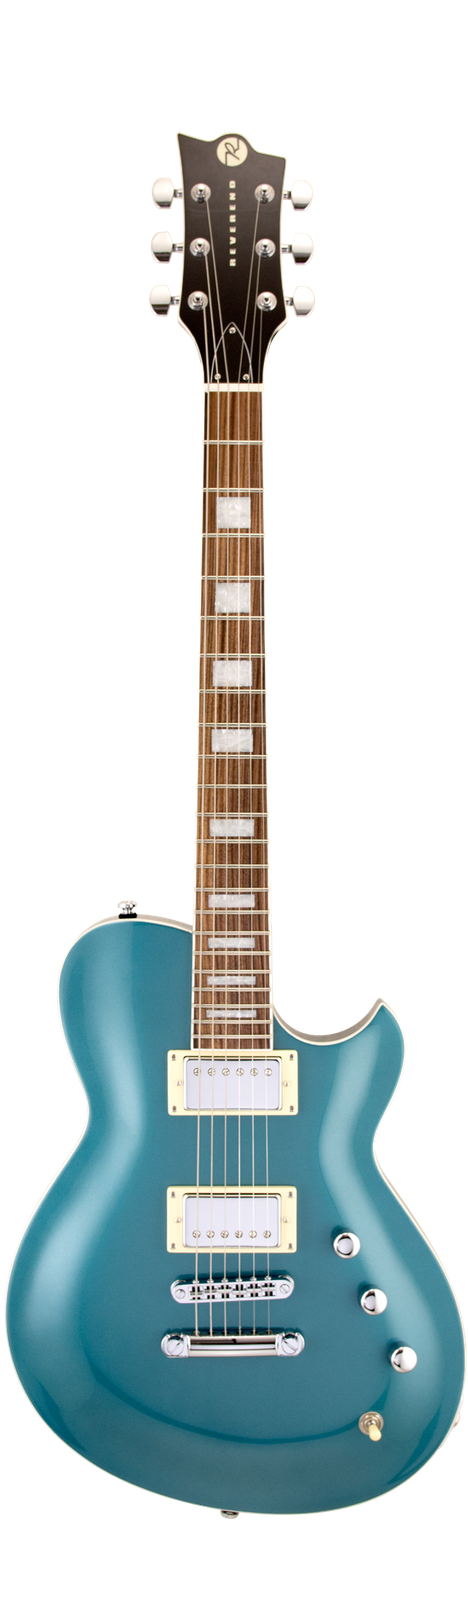 Reverend Roundhouse Electric Guitar - Deep Sea Blue